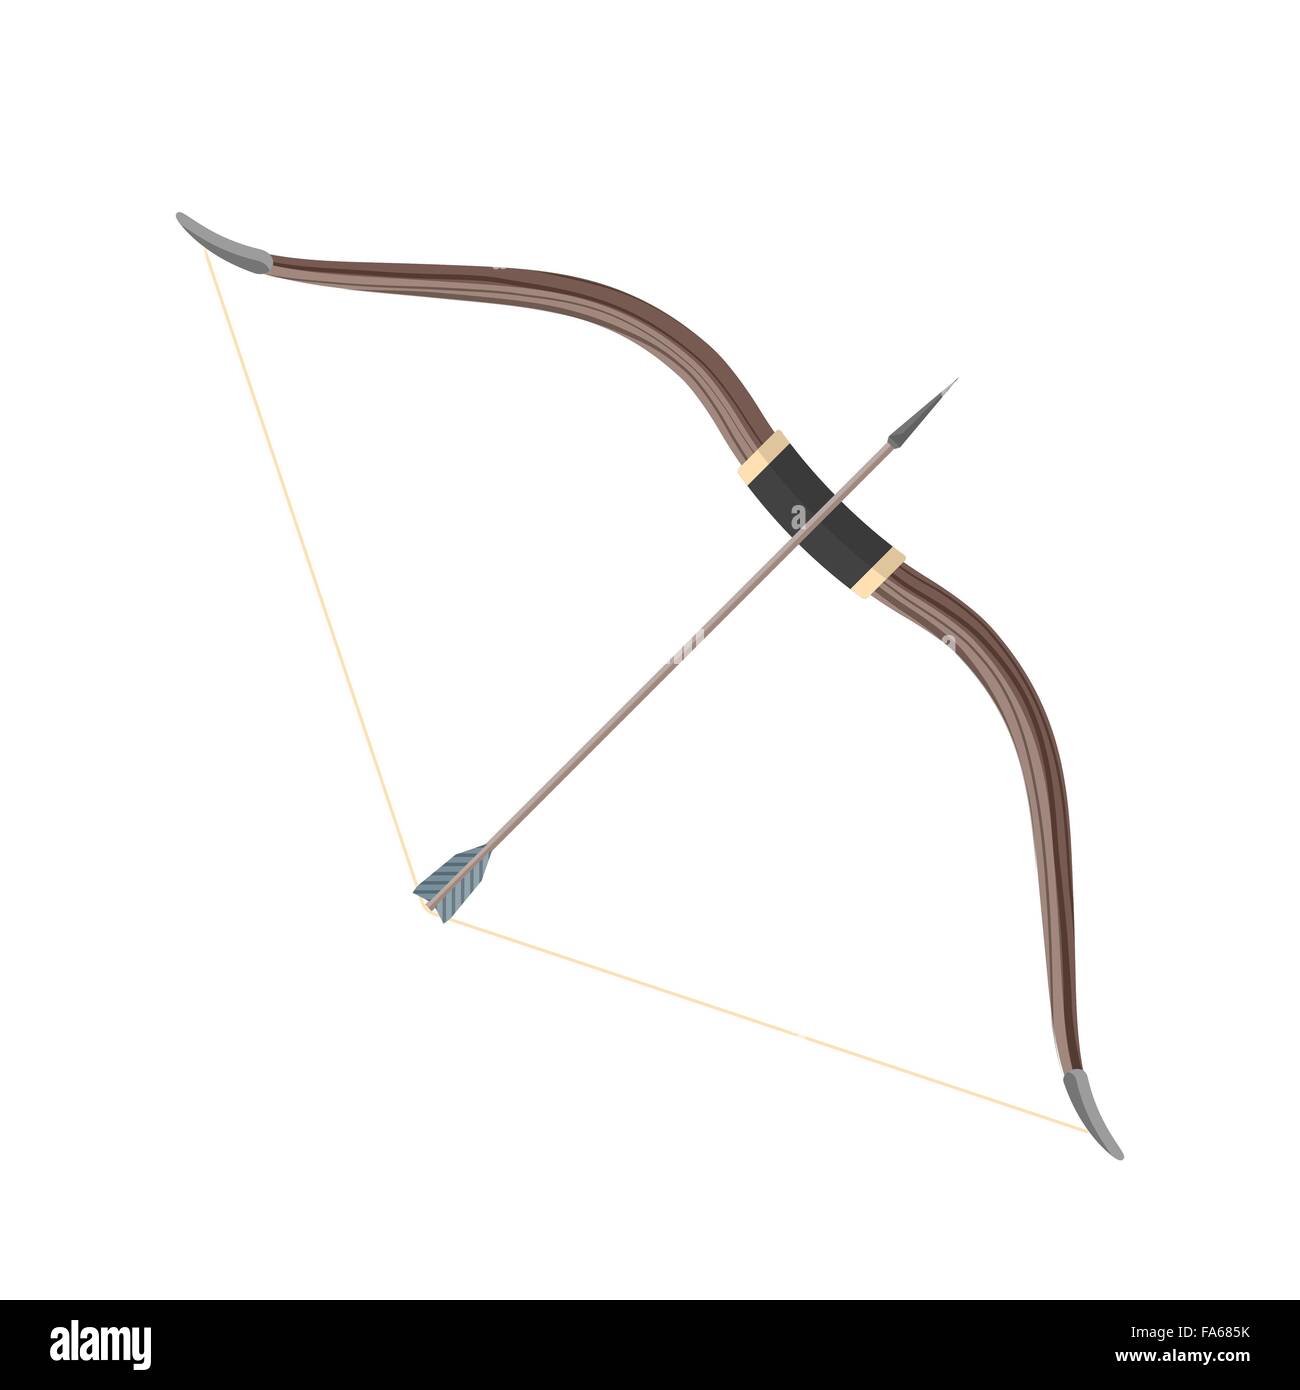 vector colorer flat design medieval wooden bow with arrow isolated illustration on white background Stock Vector